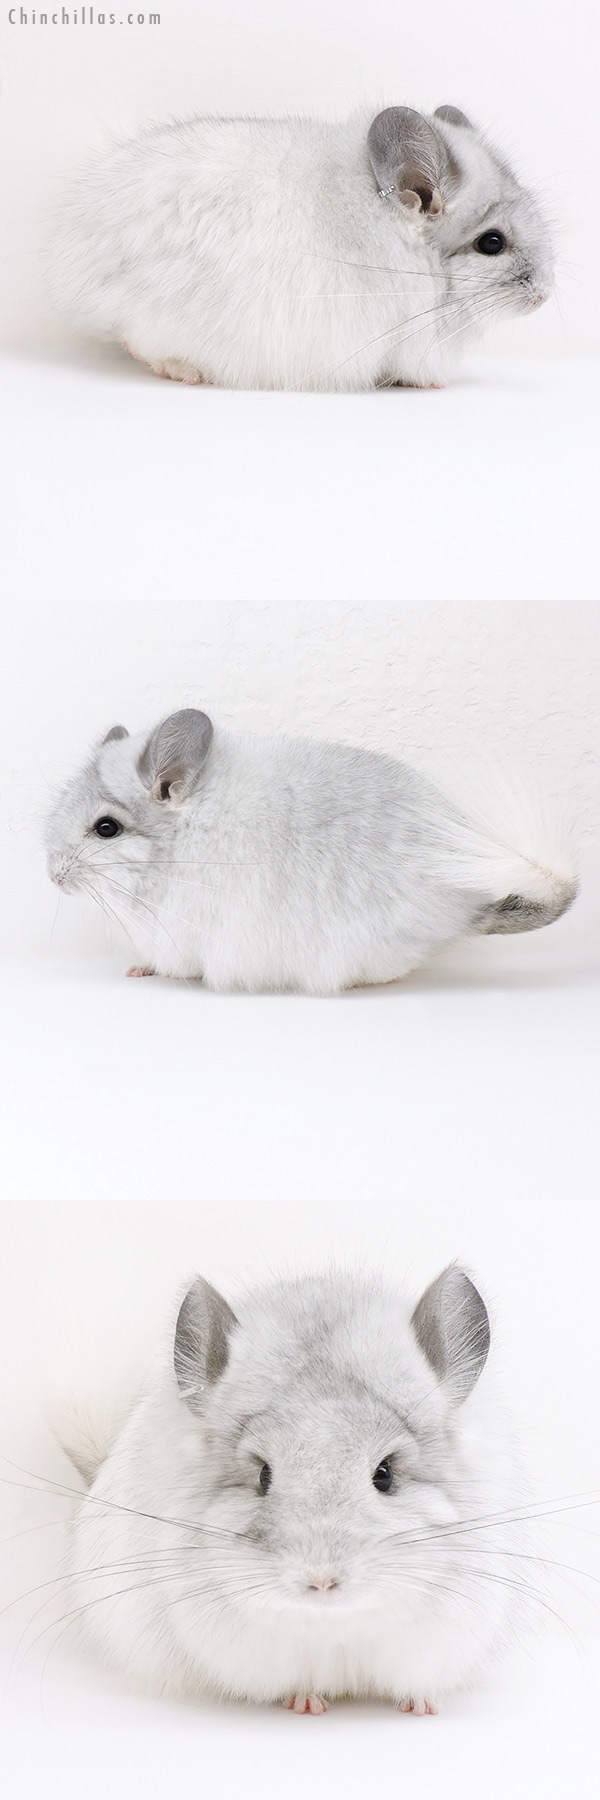 Chinchilla or related item offered for sale or export on Chinchillas.com - 16274 Silver Mosaic  Royal Persian Angora Female Chinchilla